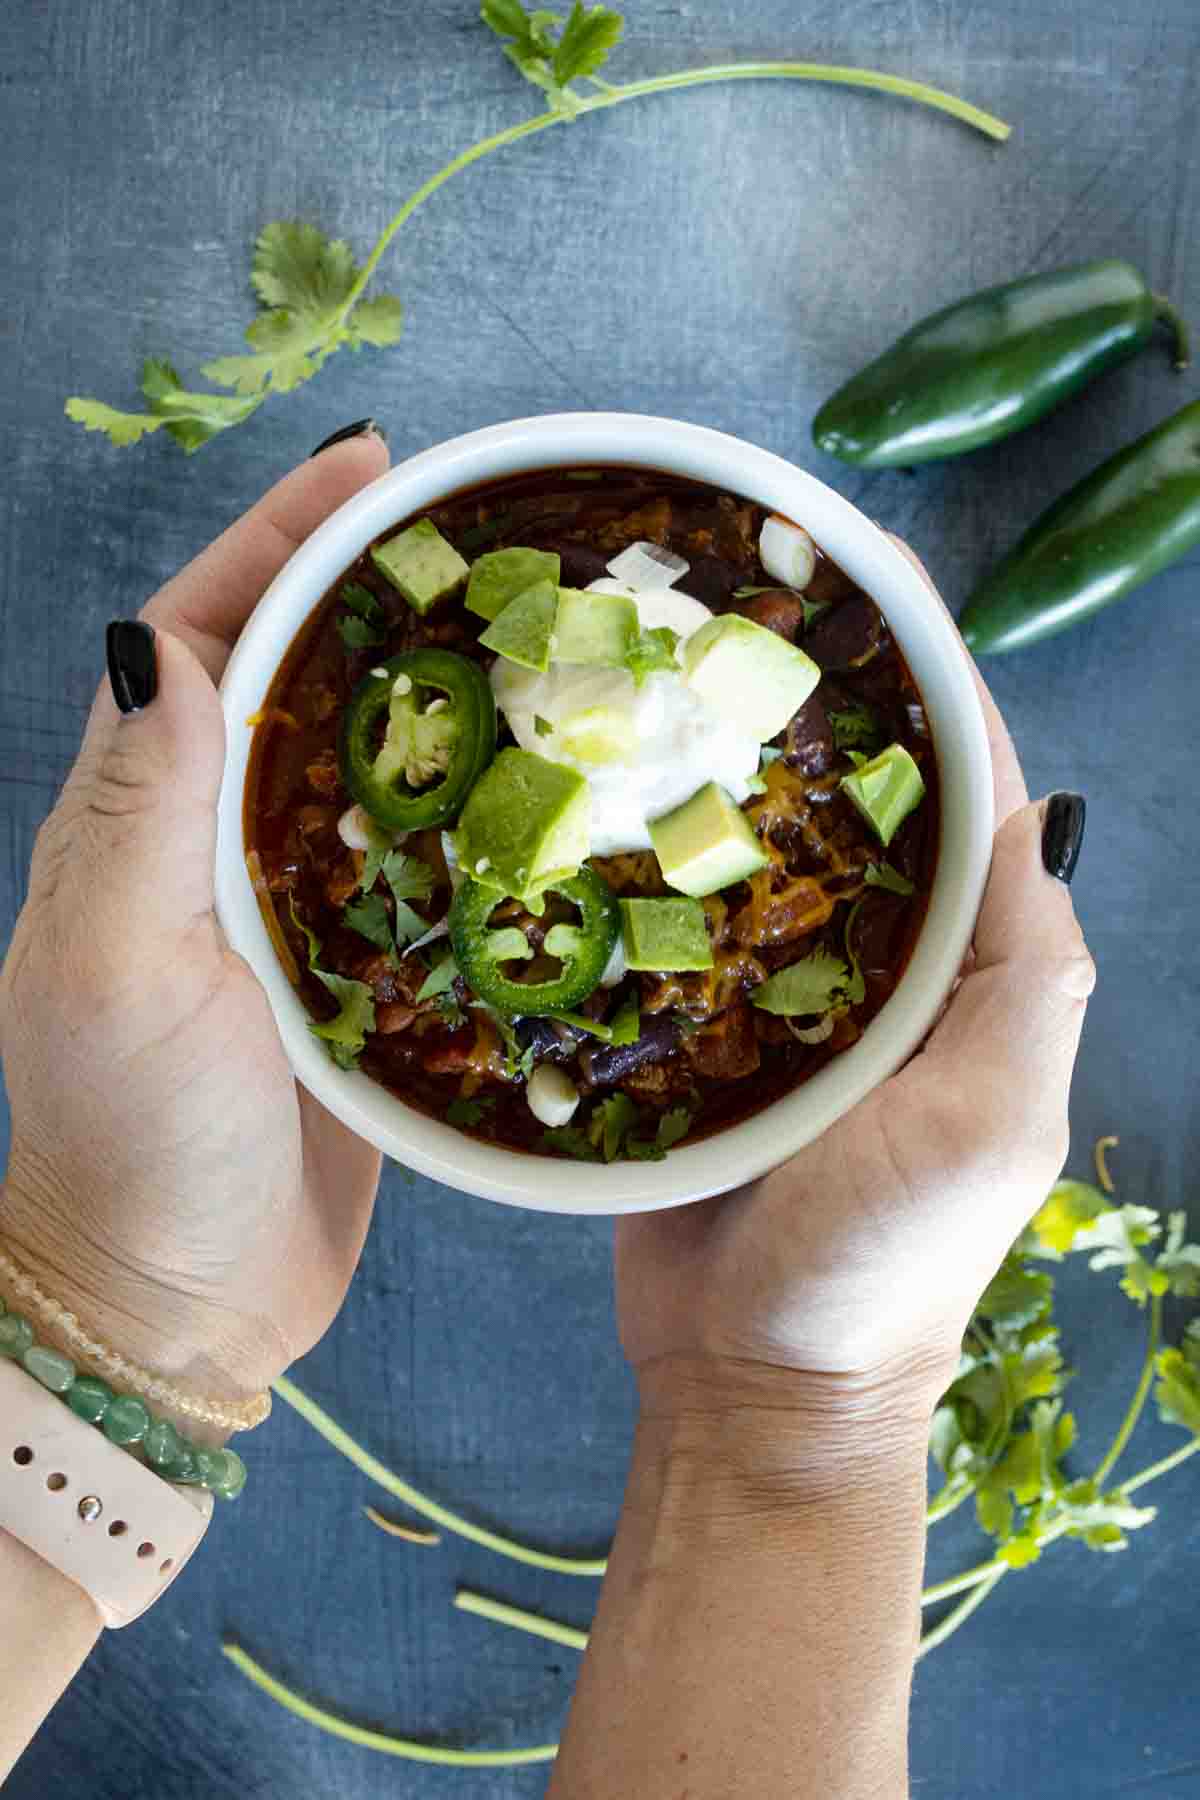 Beef Chili Recipe {Classic and Easy!} - The Seasoned Mom